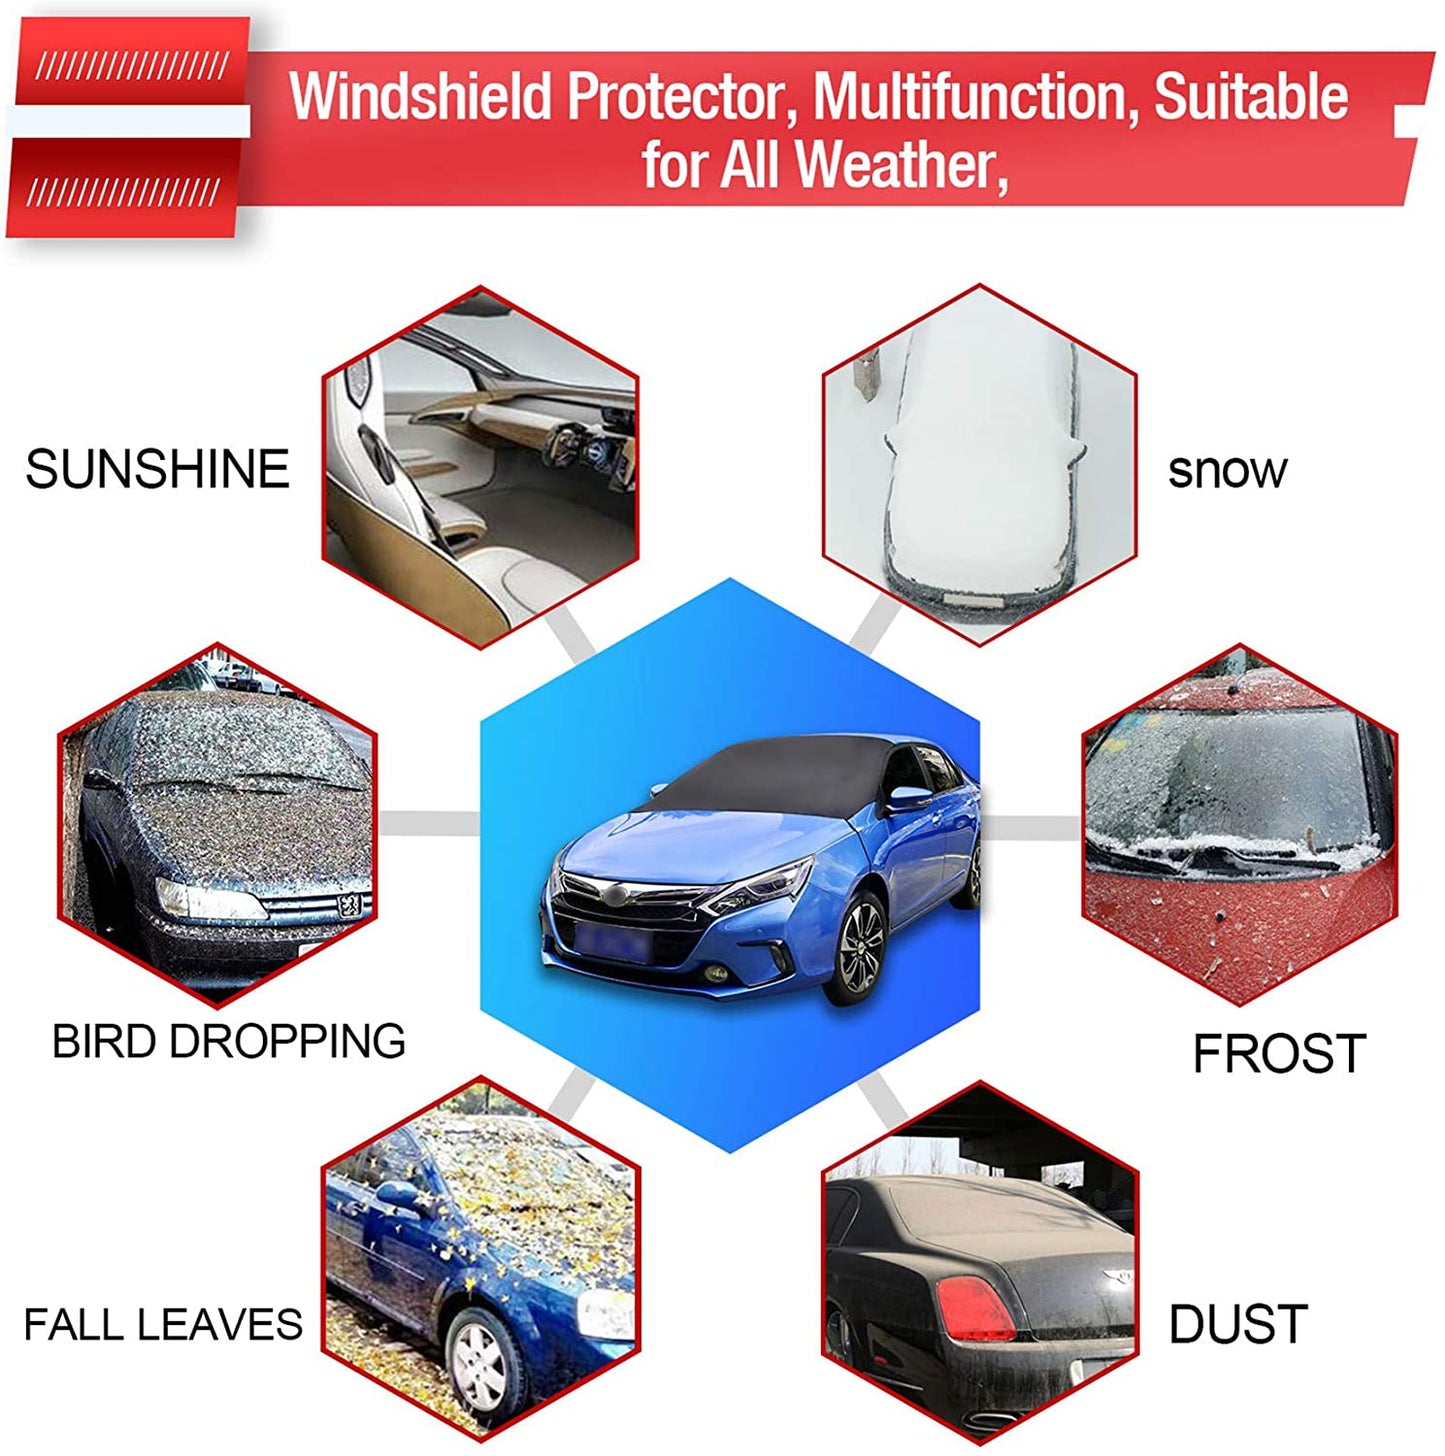 ALTITACO Car Rear Windshield Snow Cover, Rear Windscreen Snow Ice Cover Protector with Flaps and 4 Magnets, Sun Shade Protector Exterior Shield Guard Fits Most Cars, Trucks, SUV and Vans